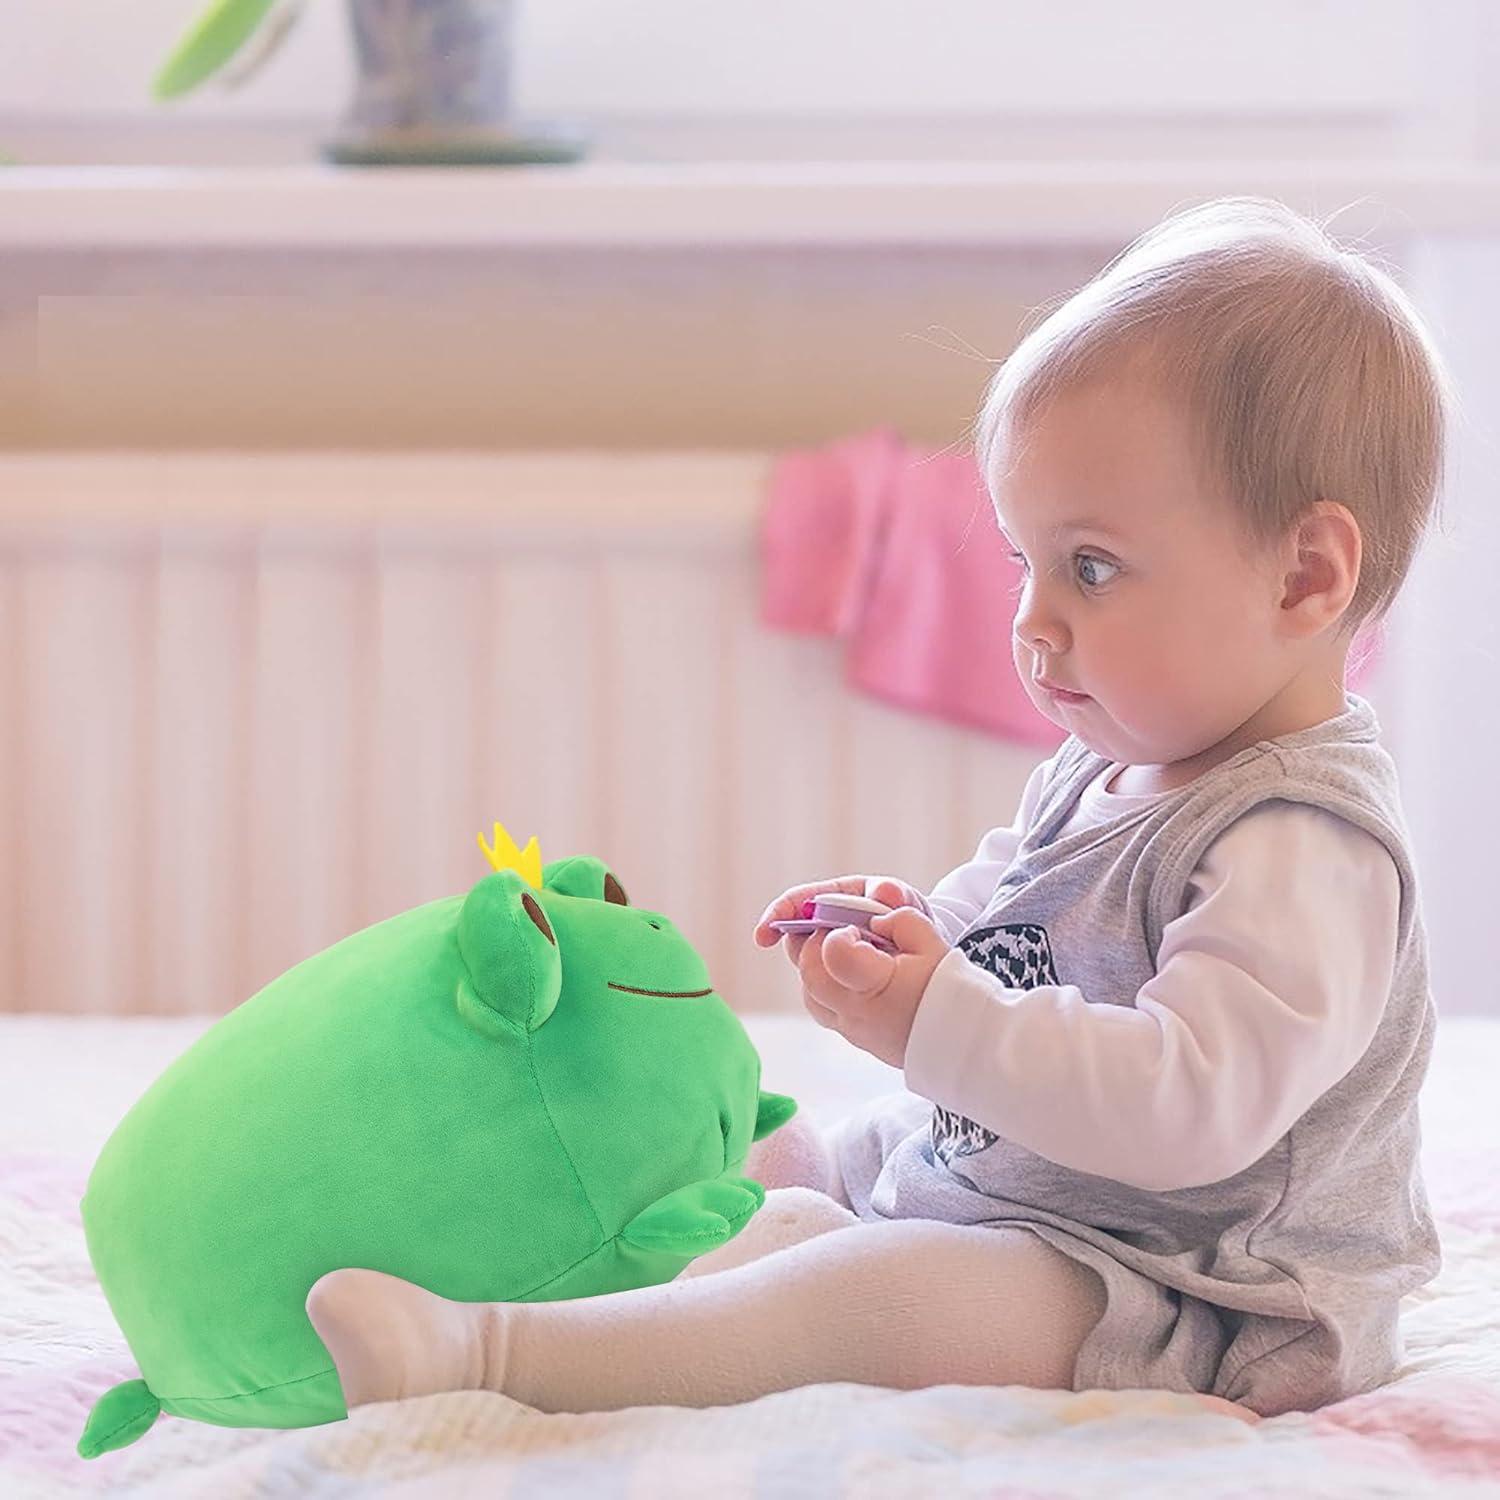 Sleepy Frog Plush Cute Toy Soft Frog Stuffed Animals Green Frog Plushie-  Hug and Cuddle with Squishy Fabric ,14''(Only for Age 14+) 